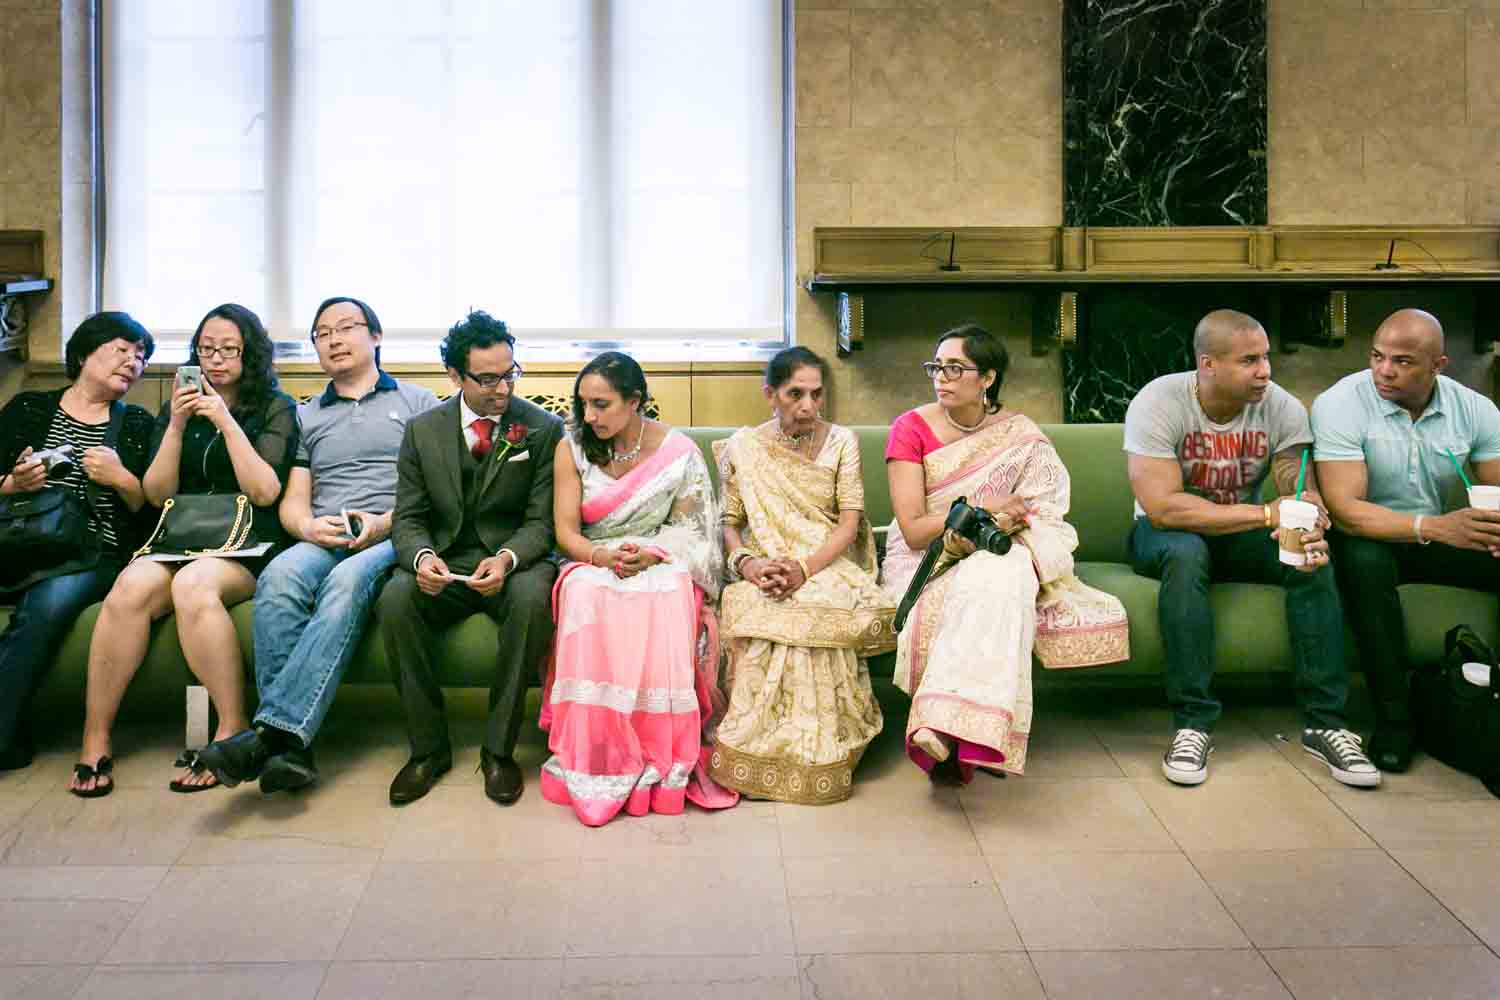 Bridal party wearing traditional saris waiting on bench at a NYC City Hall Indian wedding